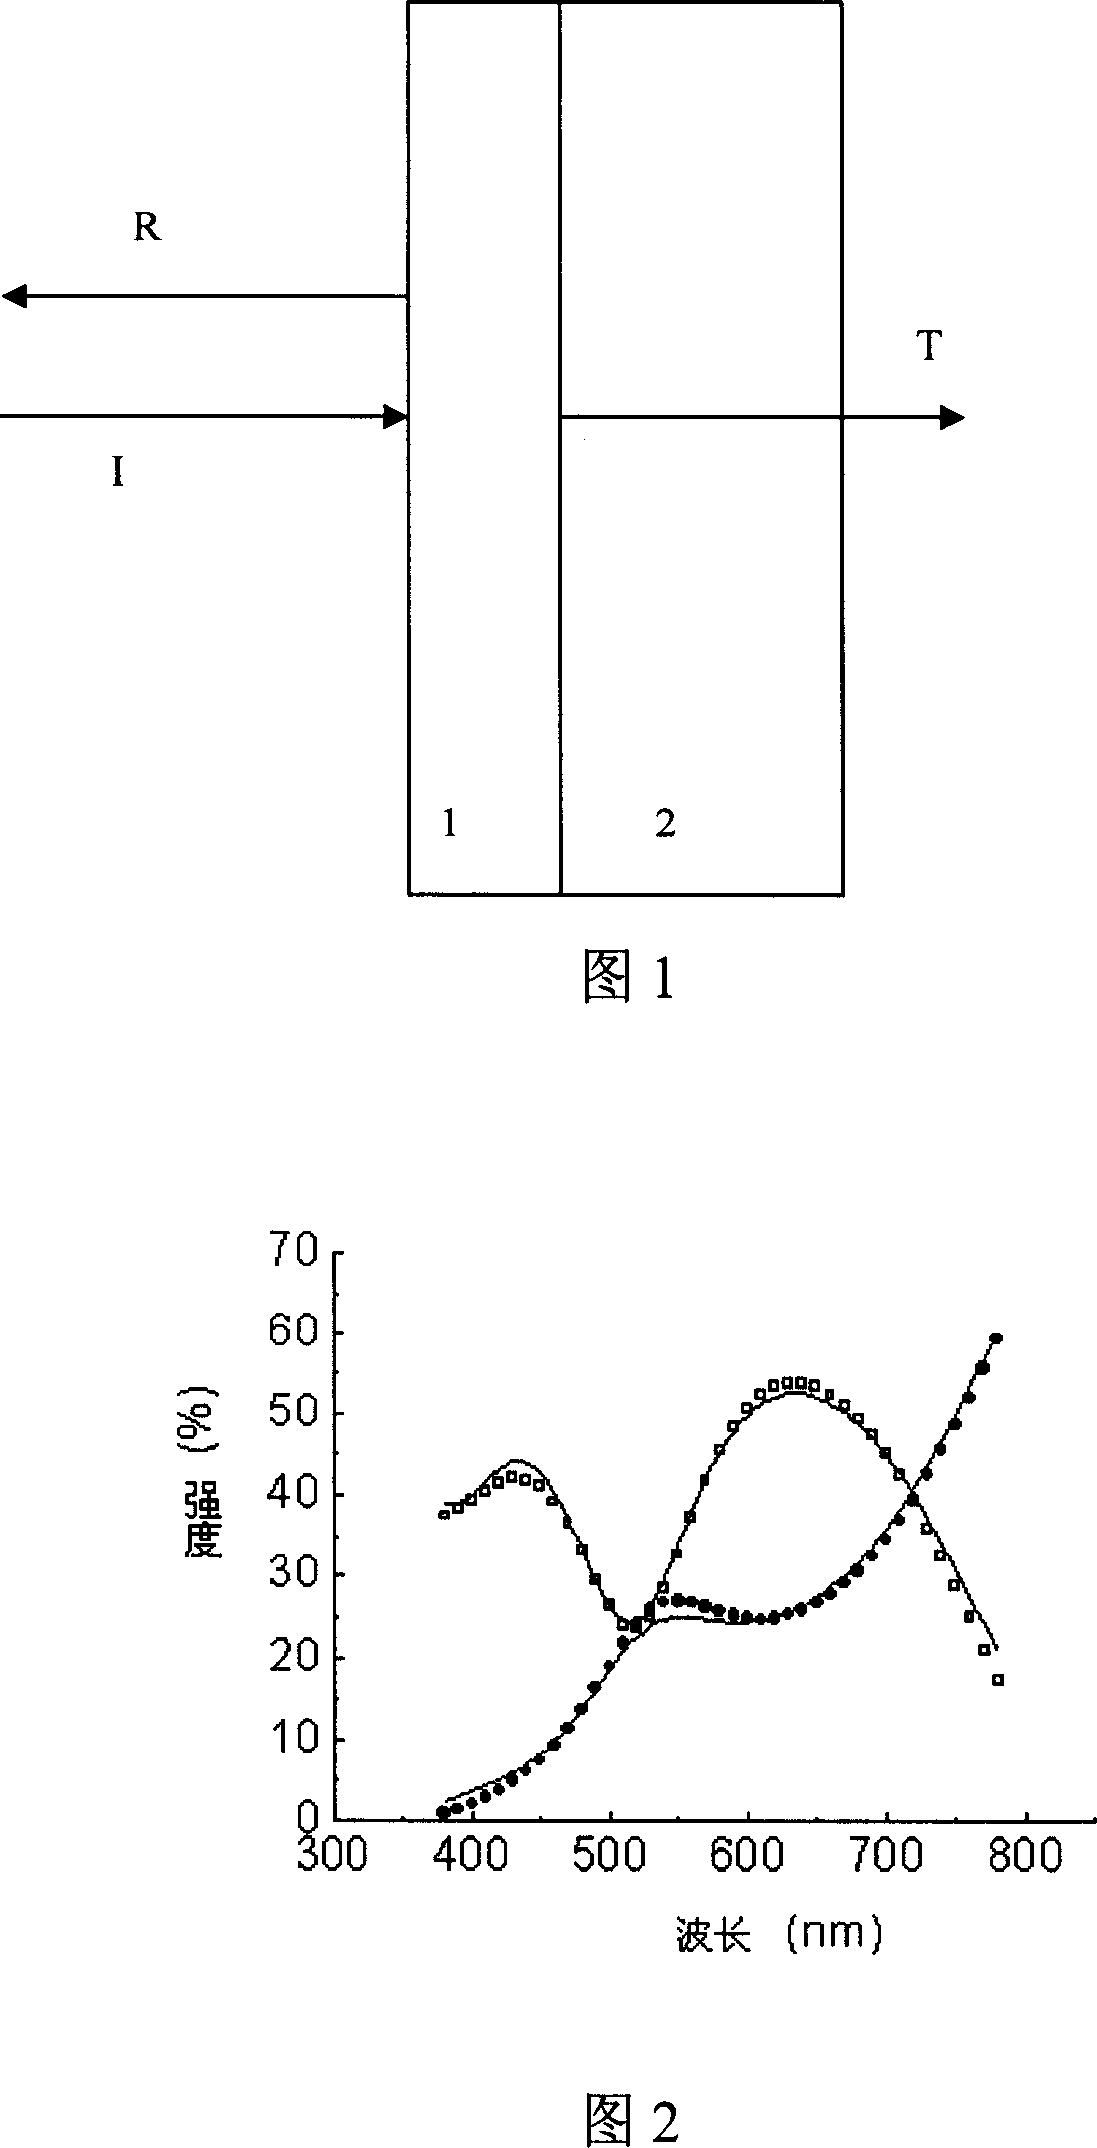 Method for measuring optical parameter of film on coated glass